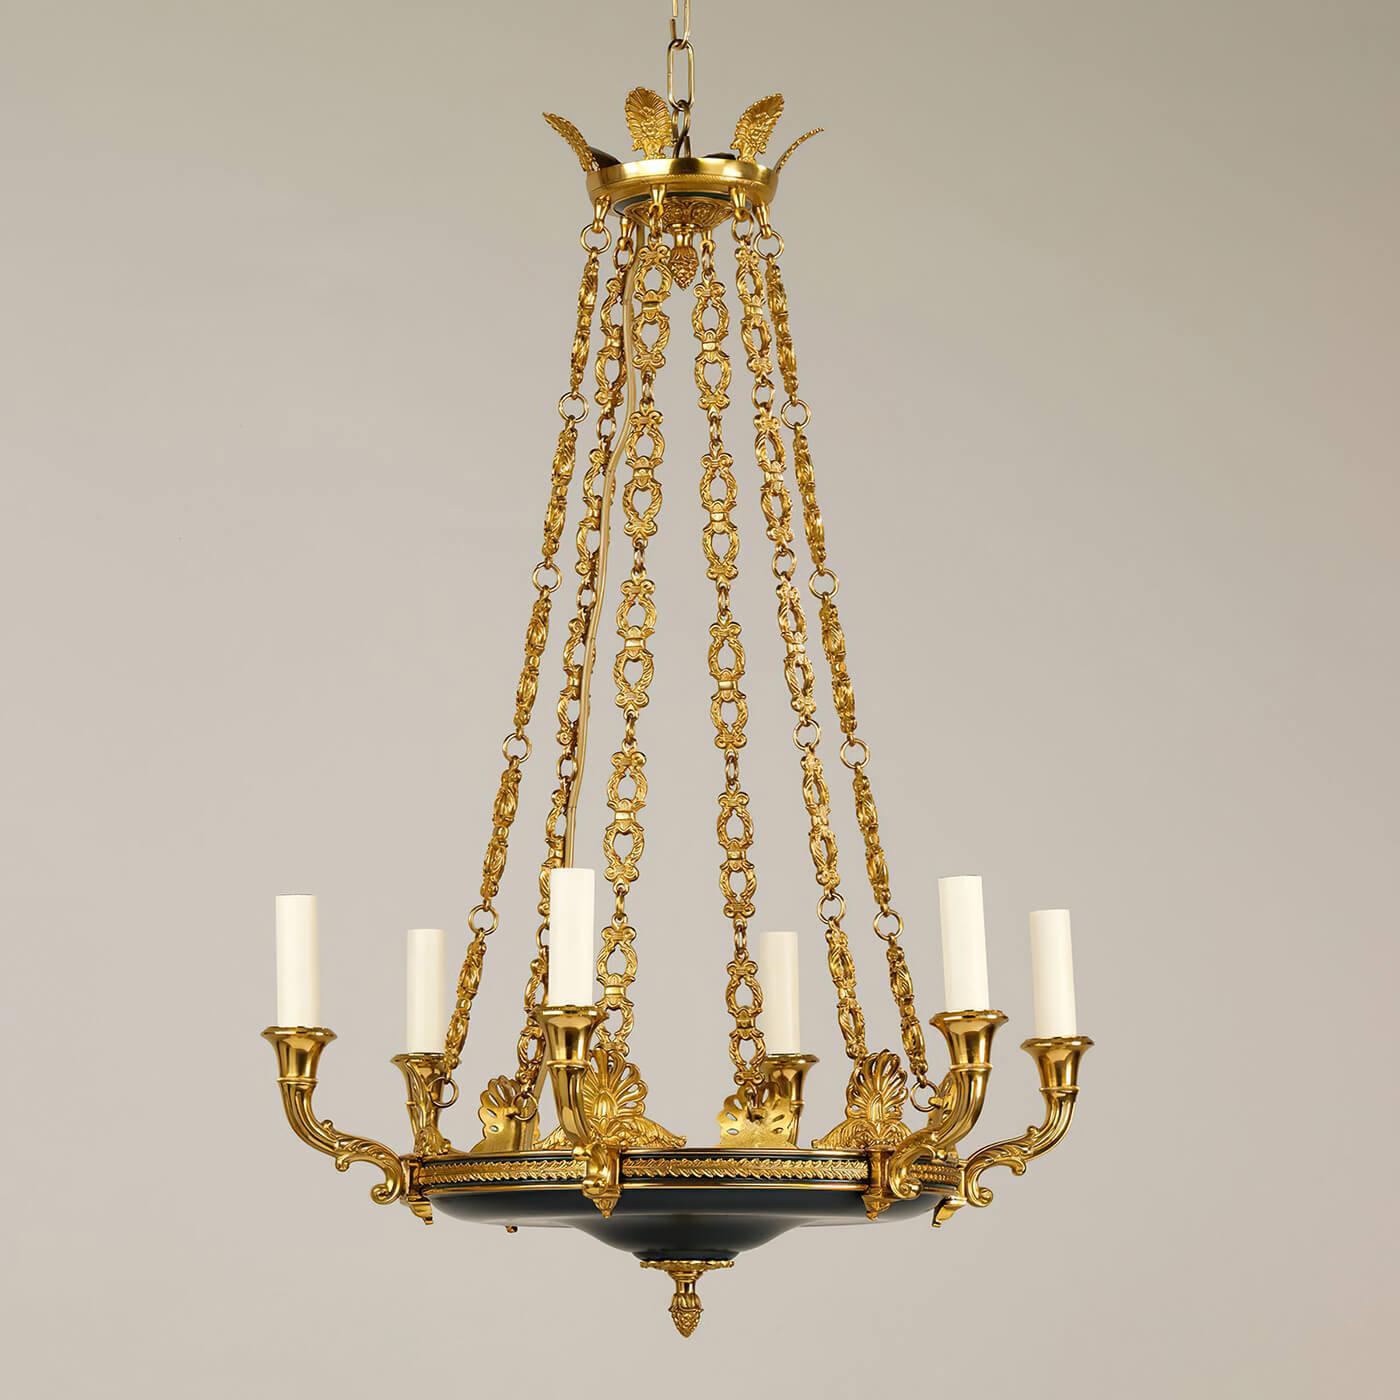 Francois Empire six-light chandelier, the ornate decoration on the arms, and the arrangement of the chains demonstrate exceptional casting in brass. With beautifully cast floral details of acanthus and palmettes, with acorn finials and a black